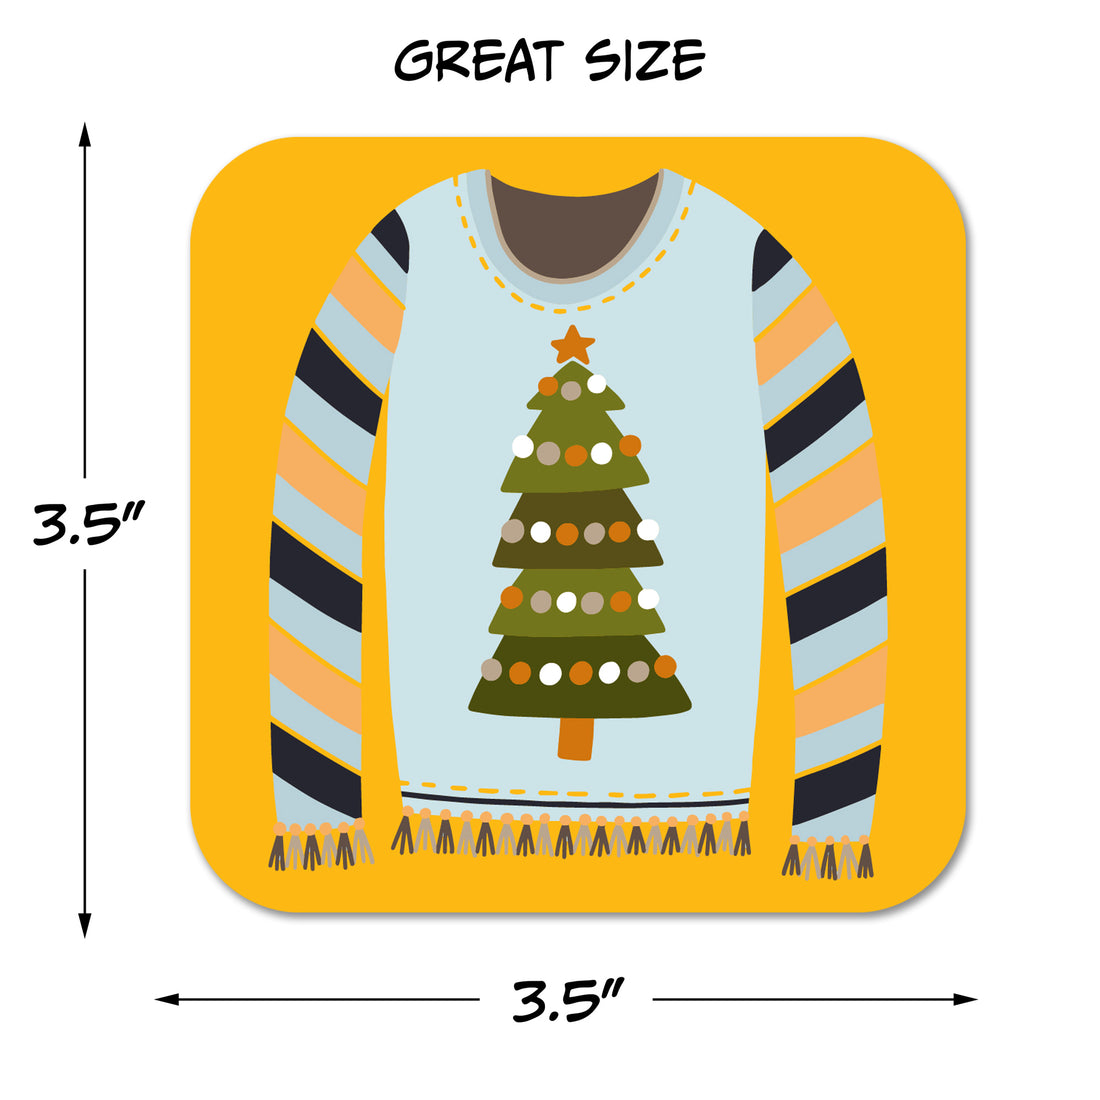 Coaster: Holiday, Christmas Sweaters Set - Pack of 6